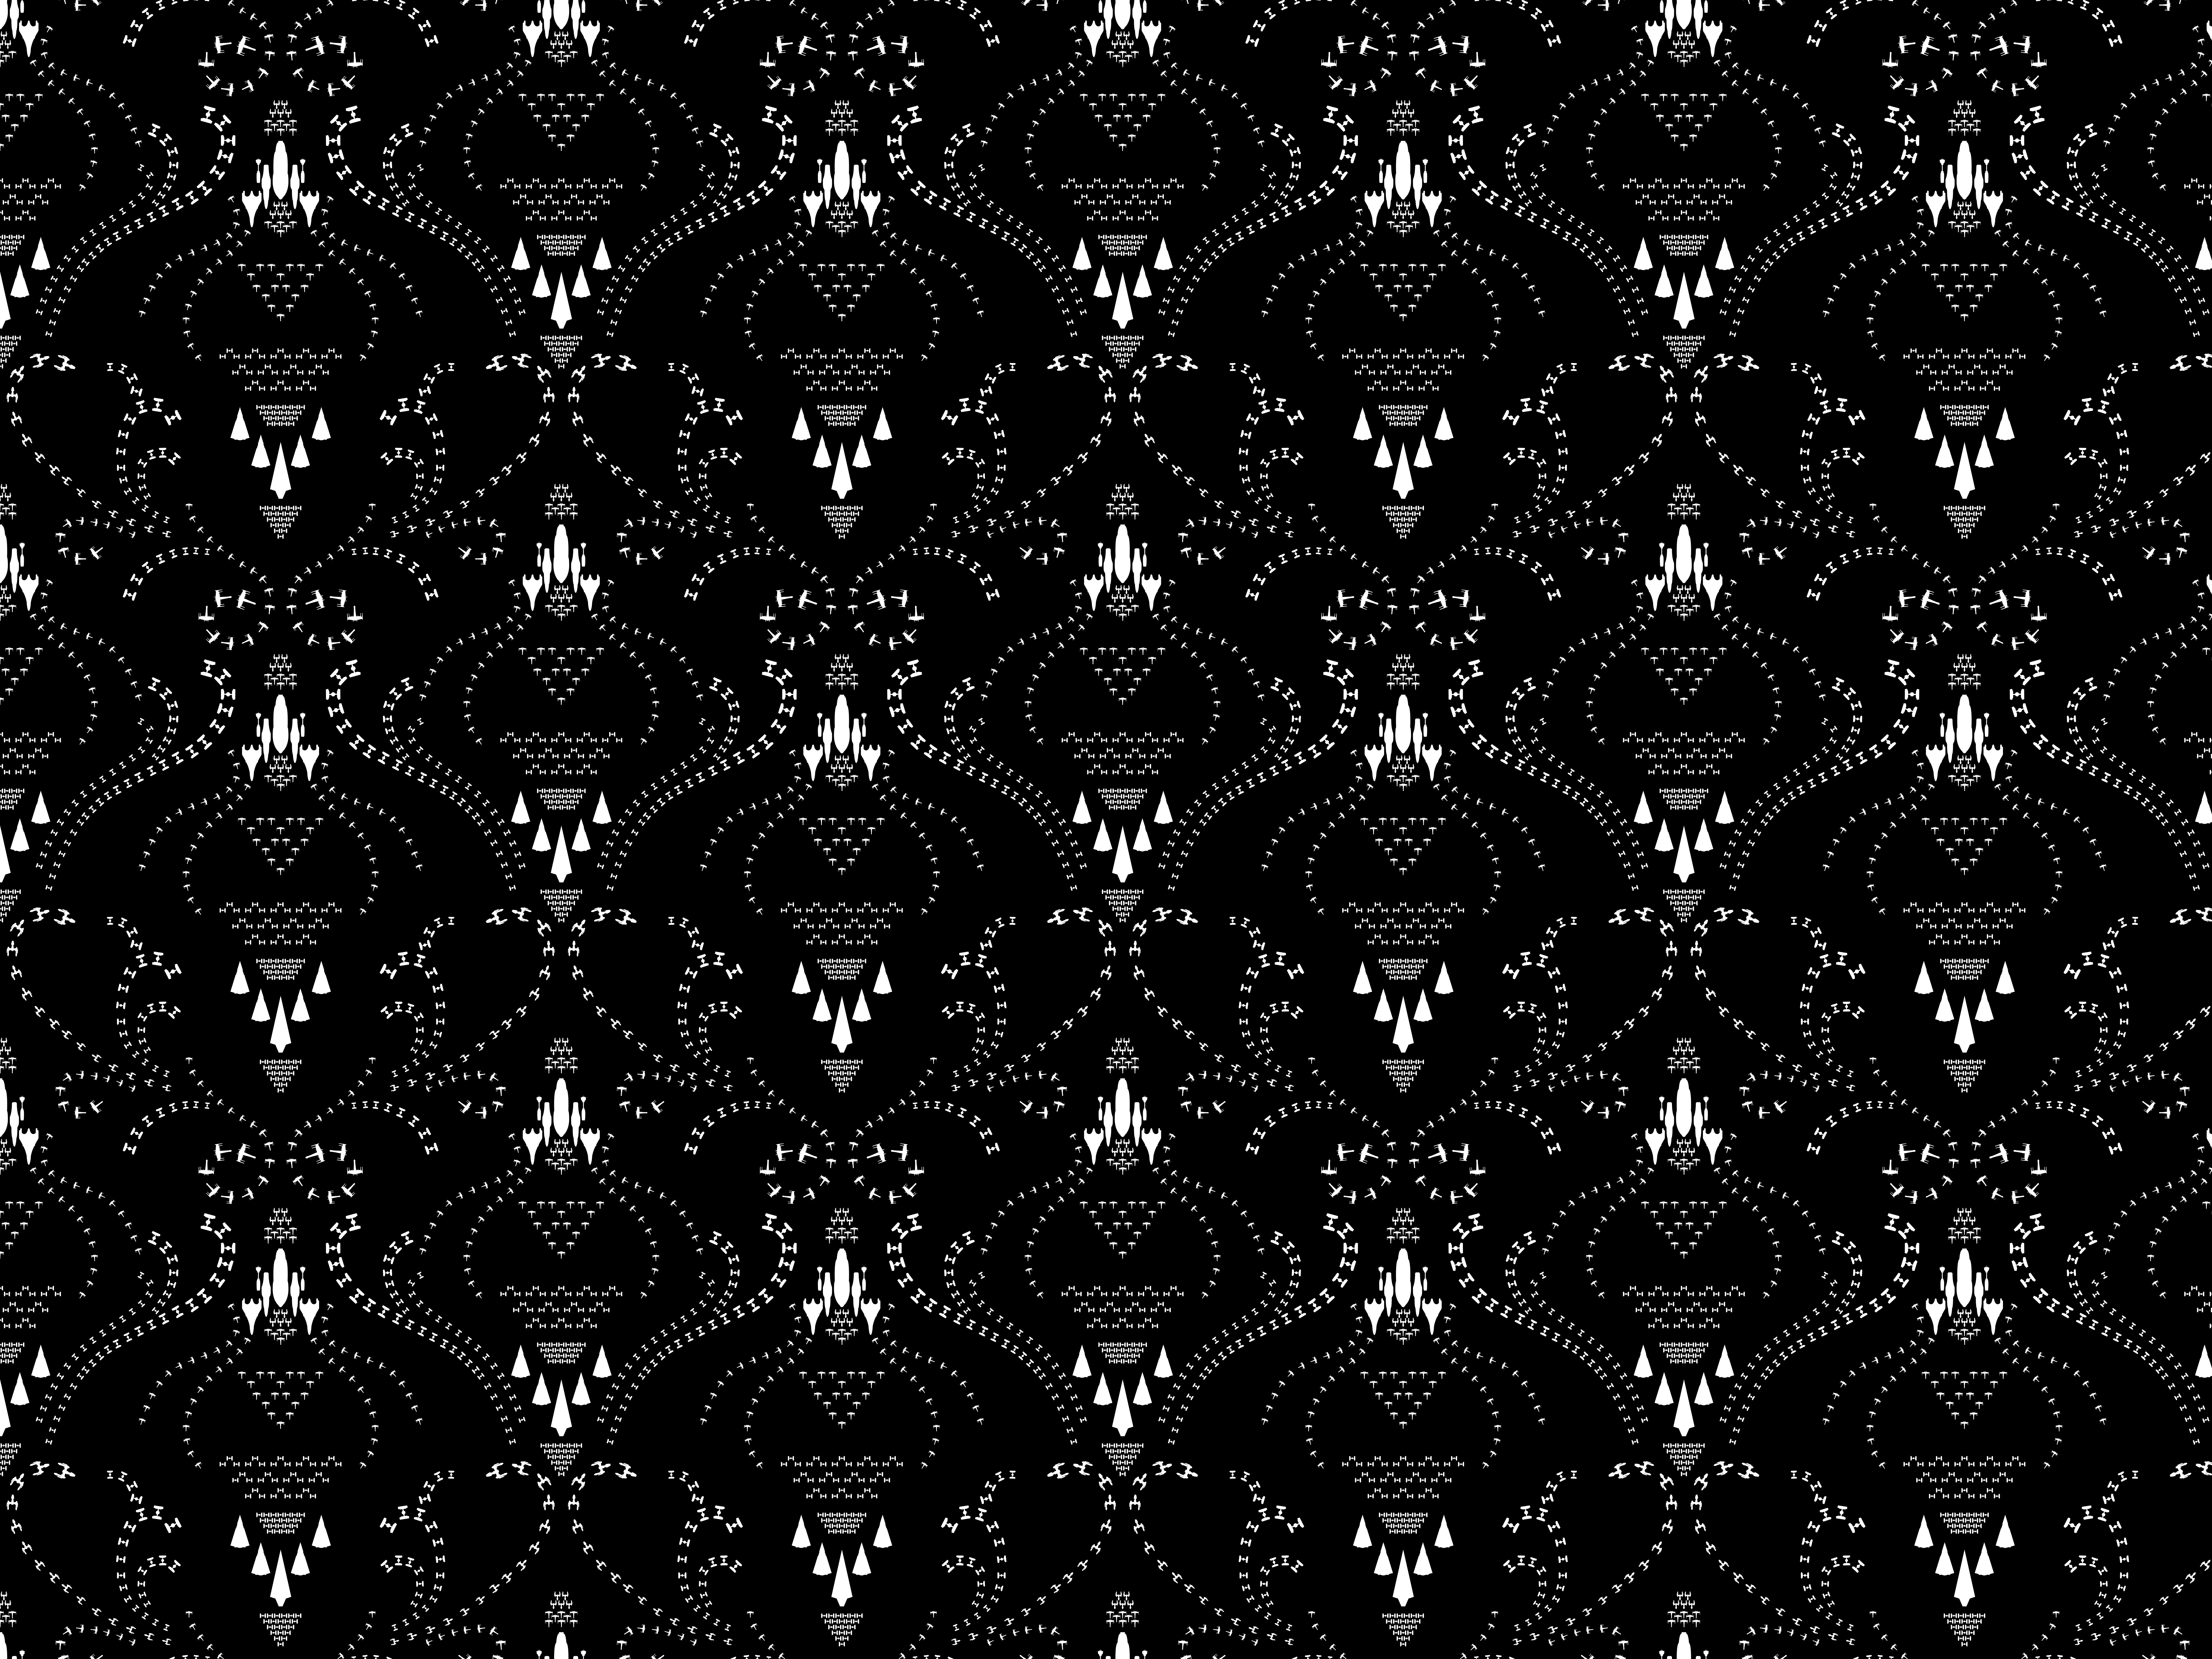 30 Human Skull Lace Textile Backgrounds Pattern Illustrations  RoyaltyFree Vector Graphics  Clip Art  iStock